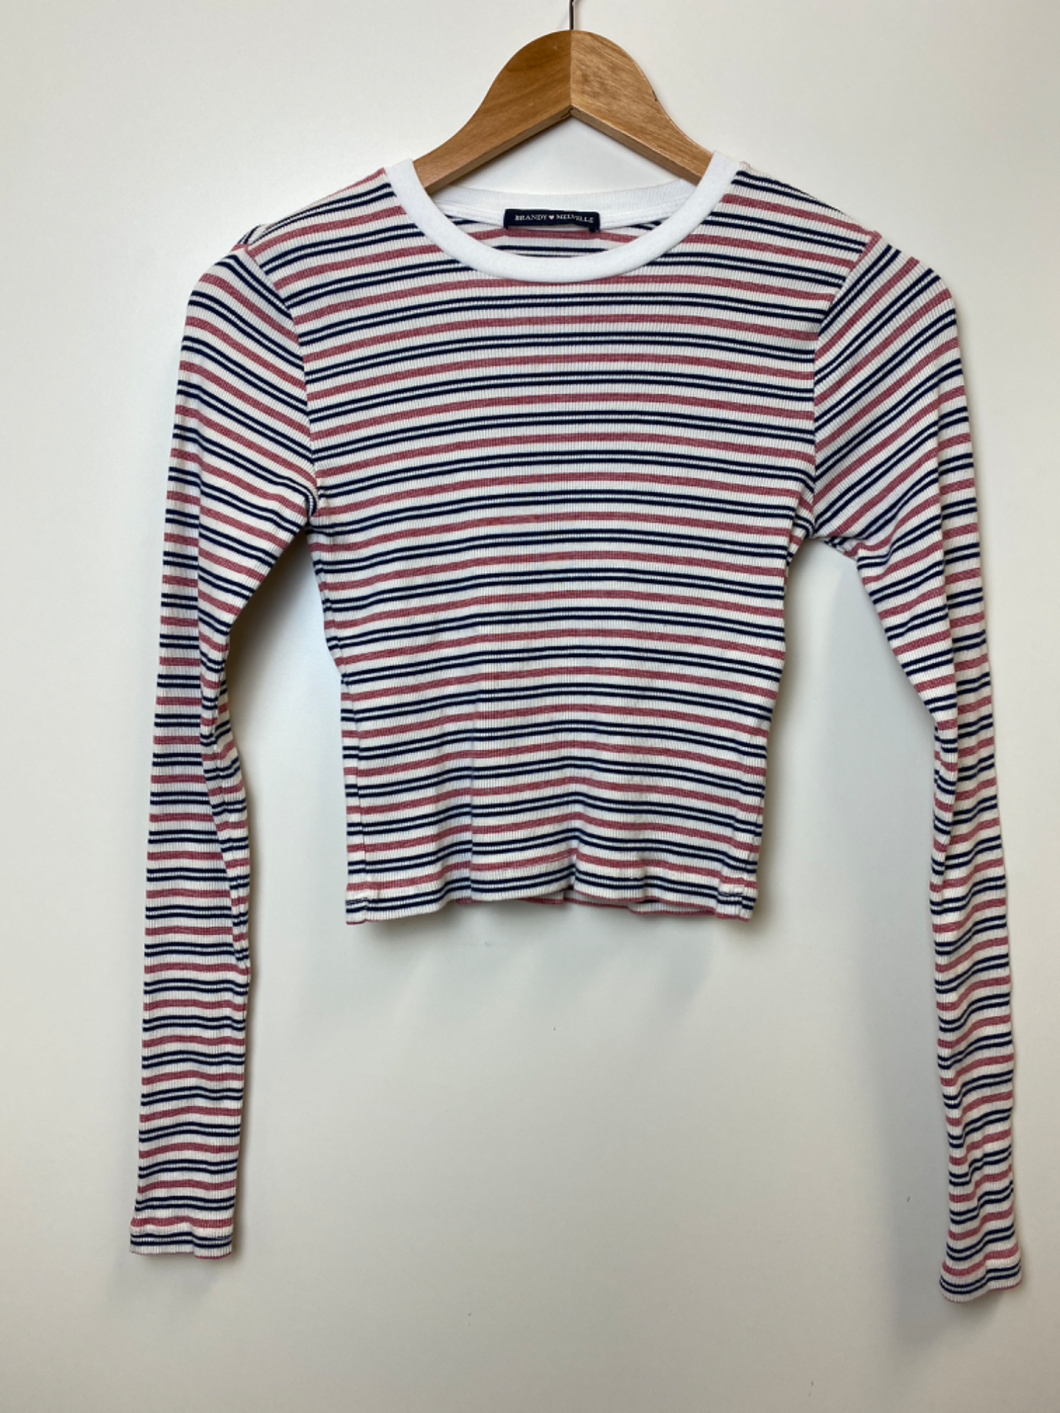 Brandy Melville Long Sleeve Top Size Small